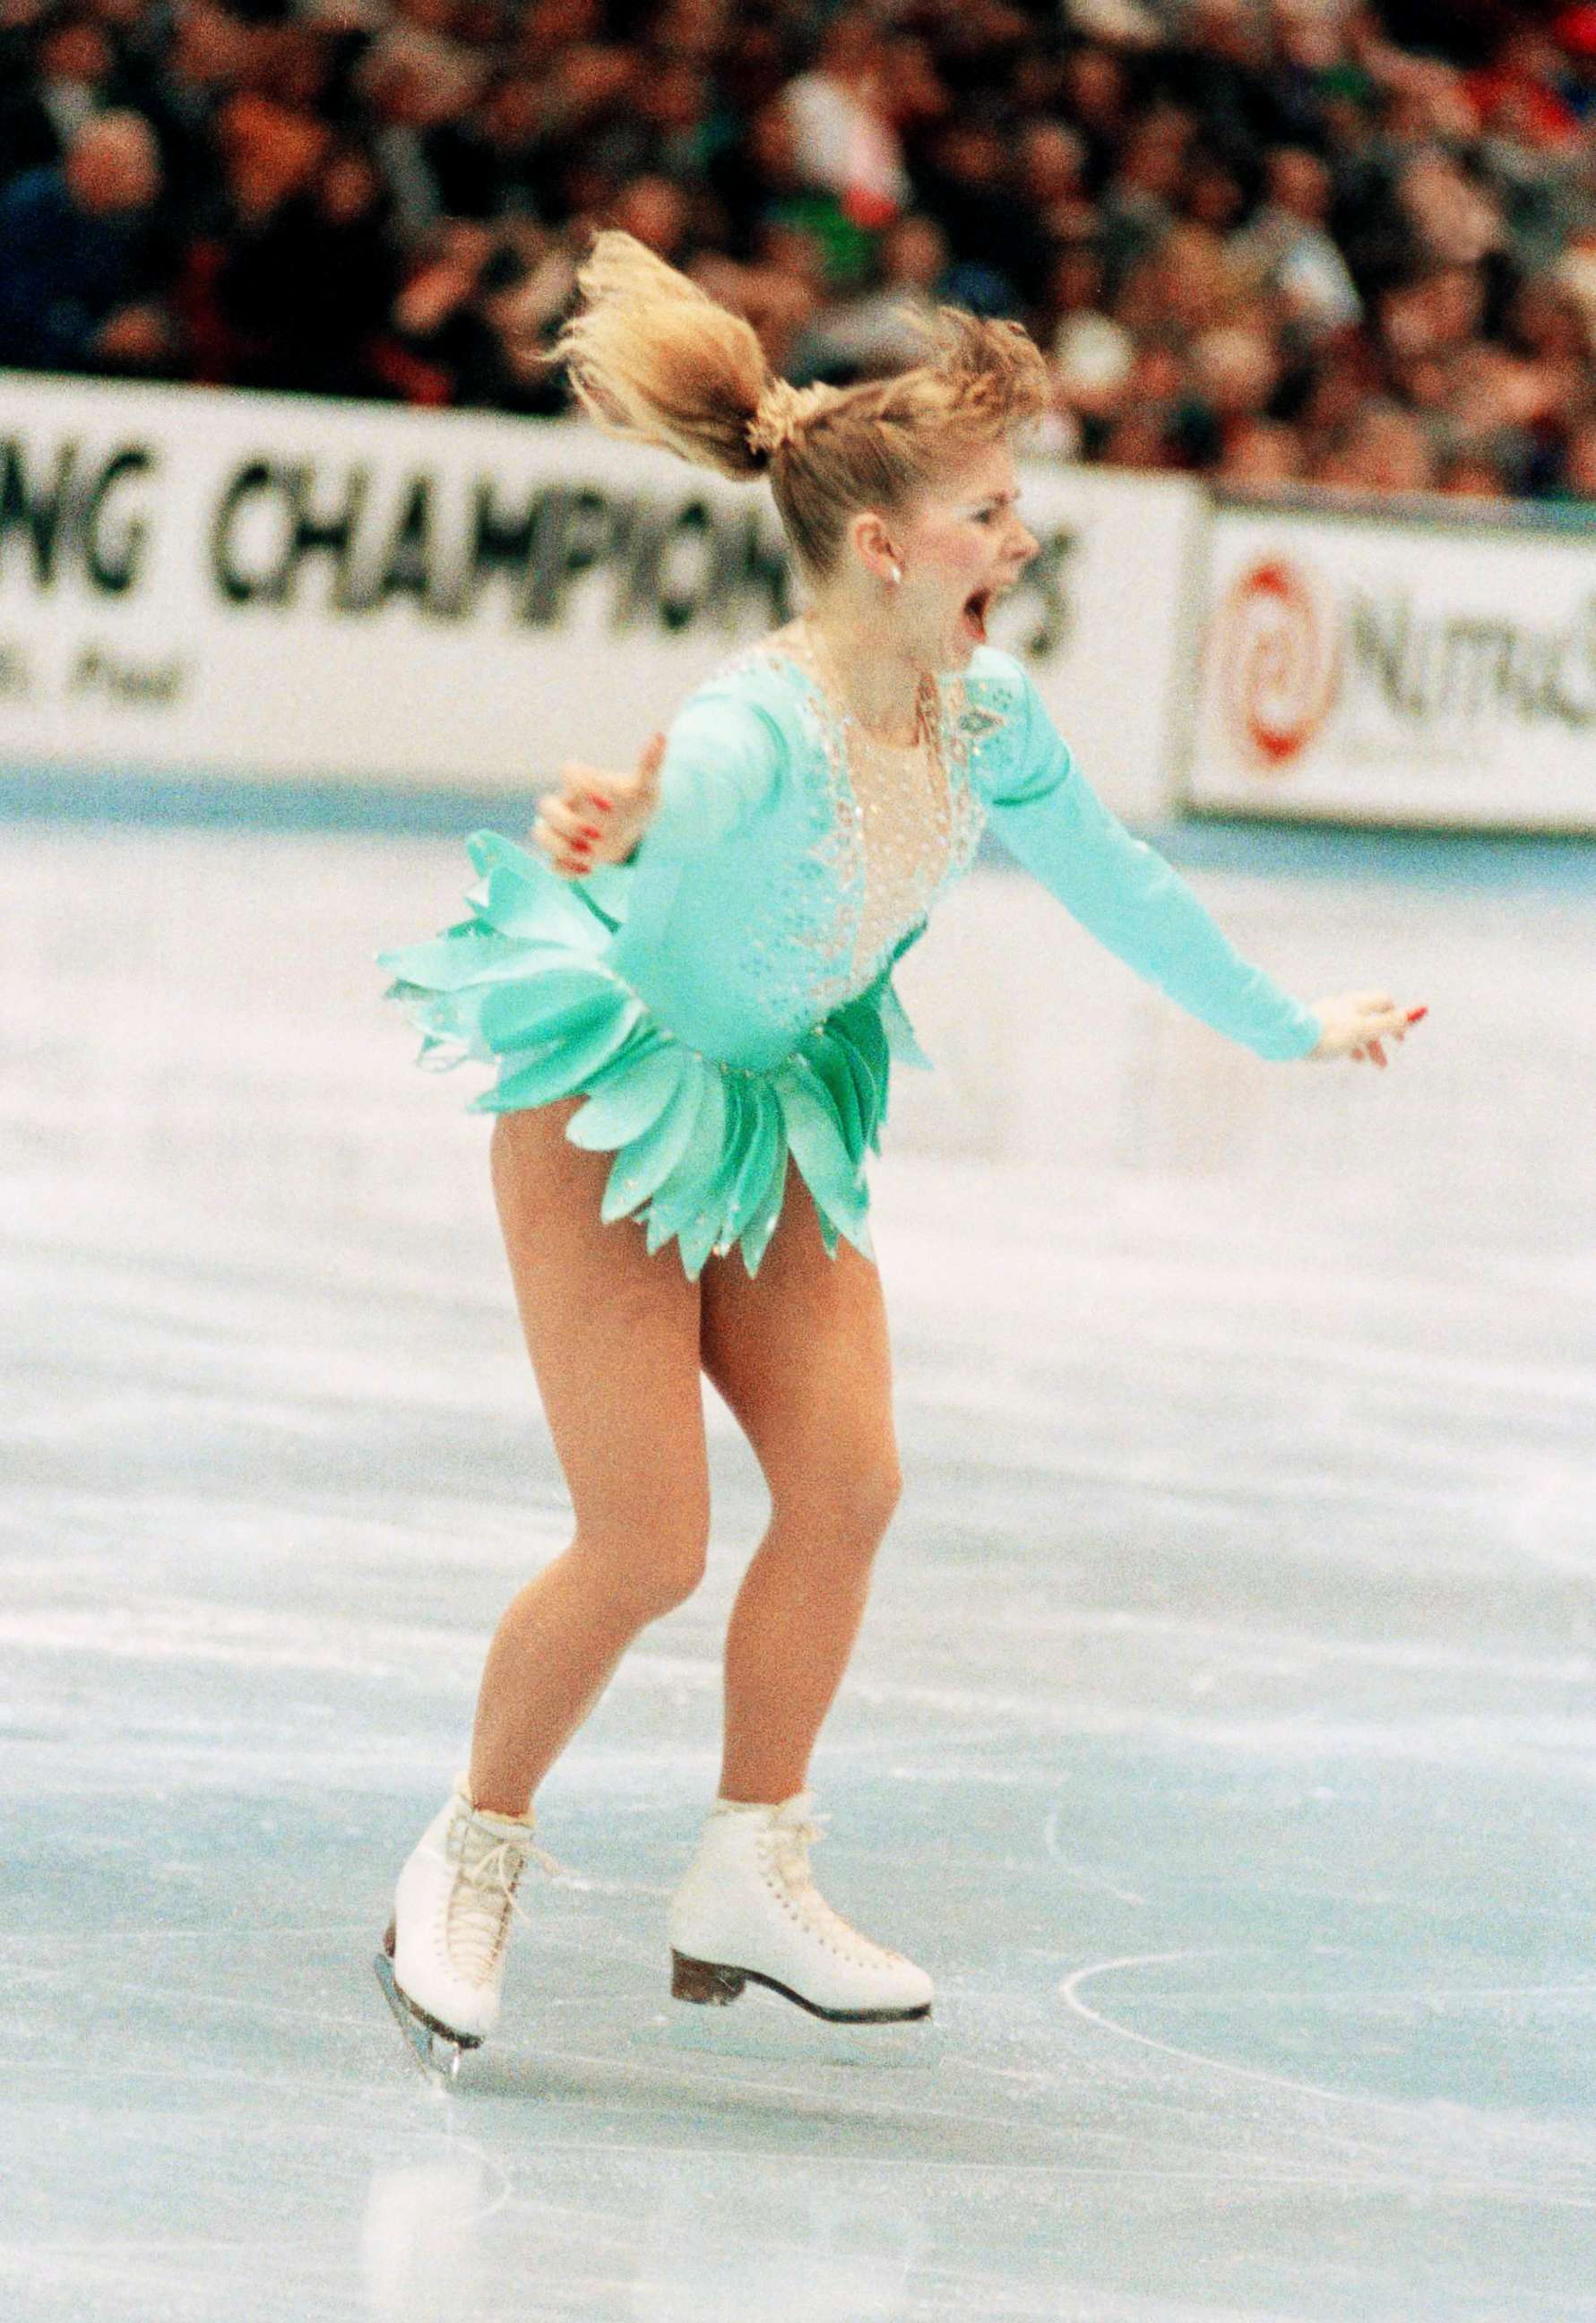 PHOTO: A jubilant Tonya Harding is acknowledged by the crowd as she comes out of her successful triple axel on her way to winning the U.S. Figure Skating Championships, Feb. 16, 1991, in Minneapolis. 